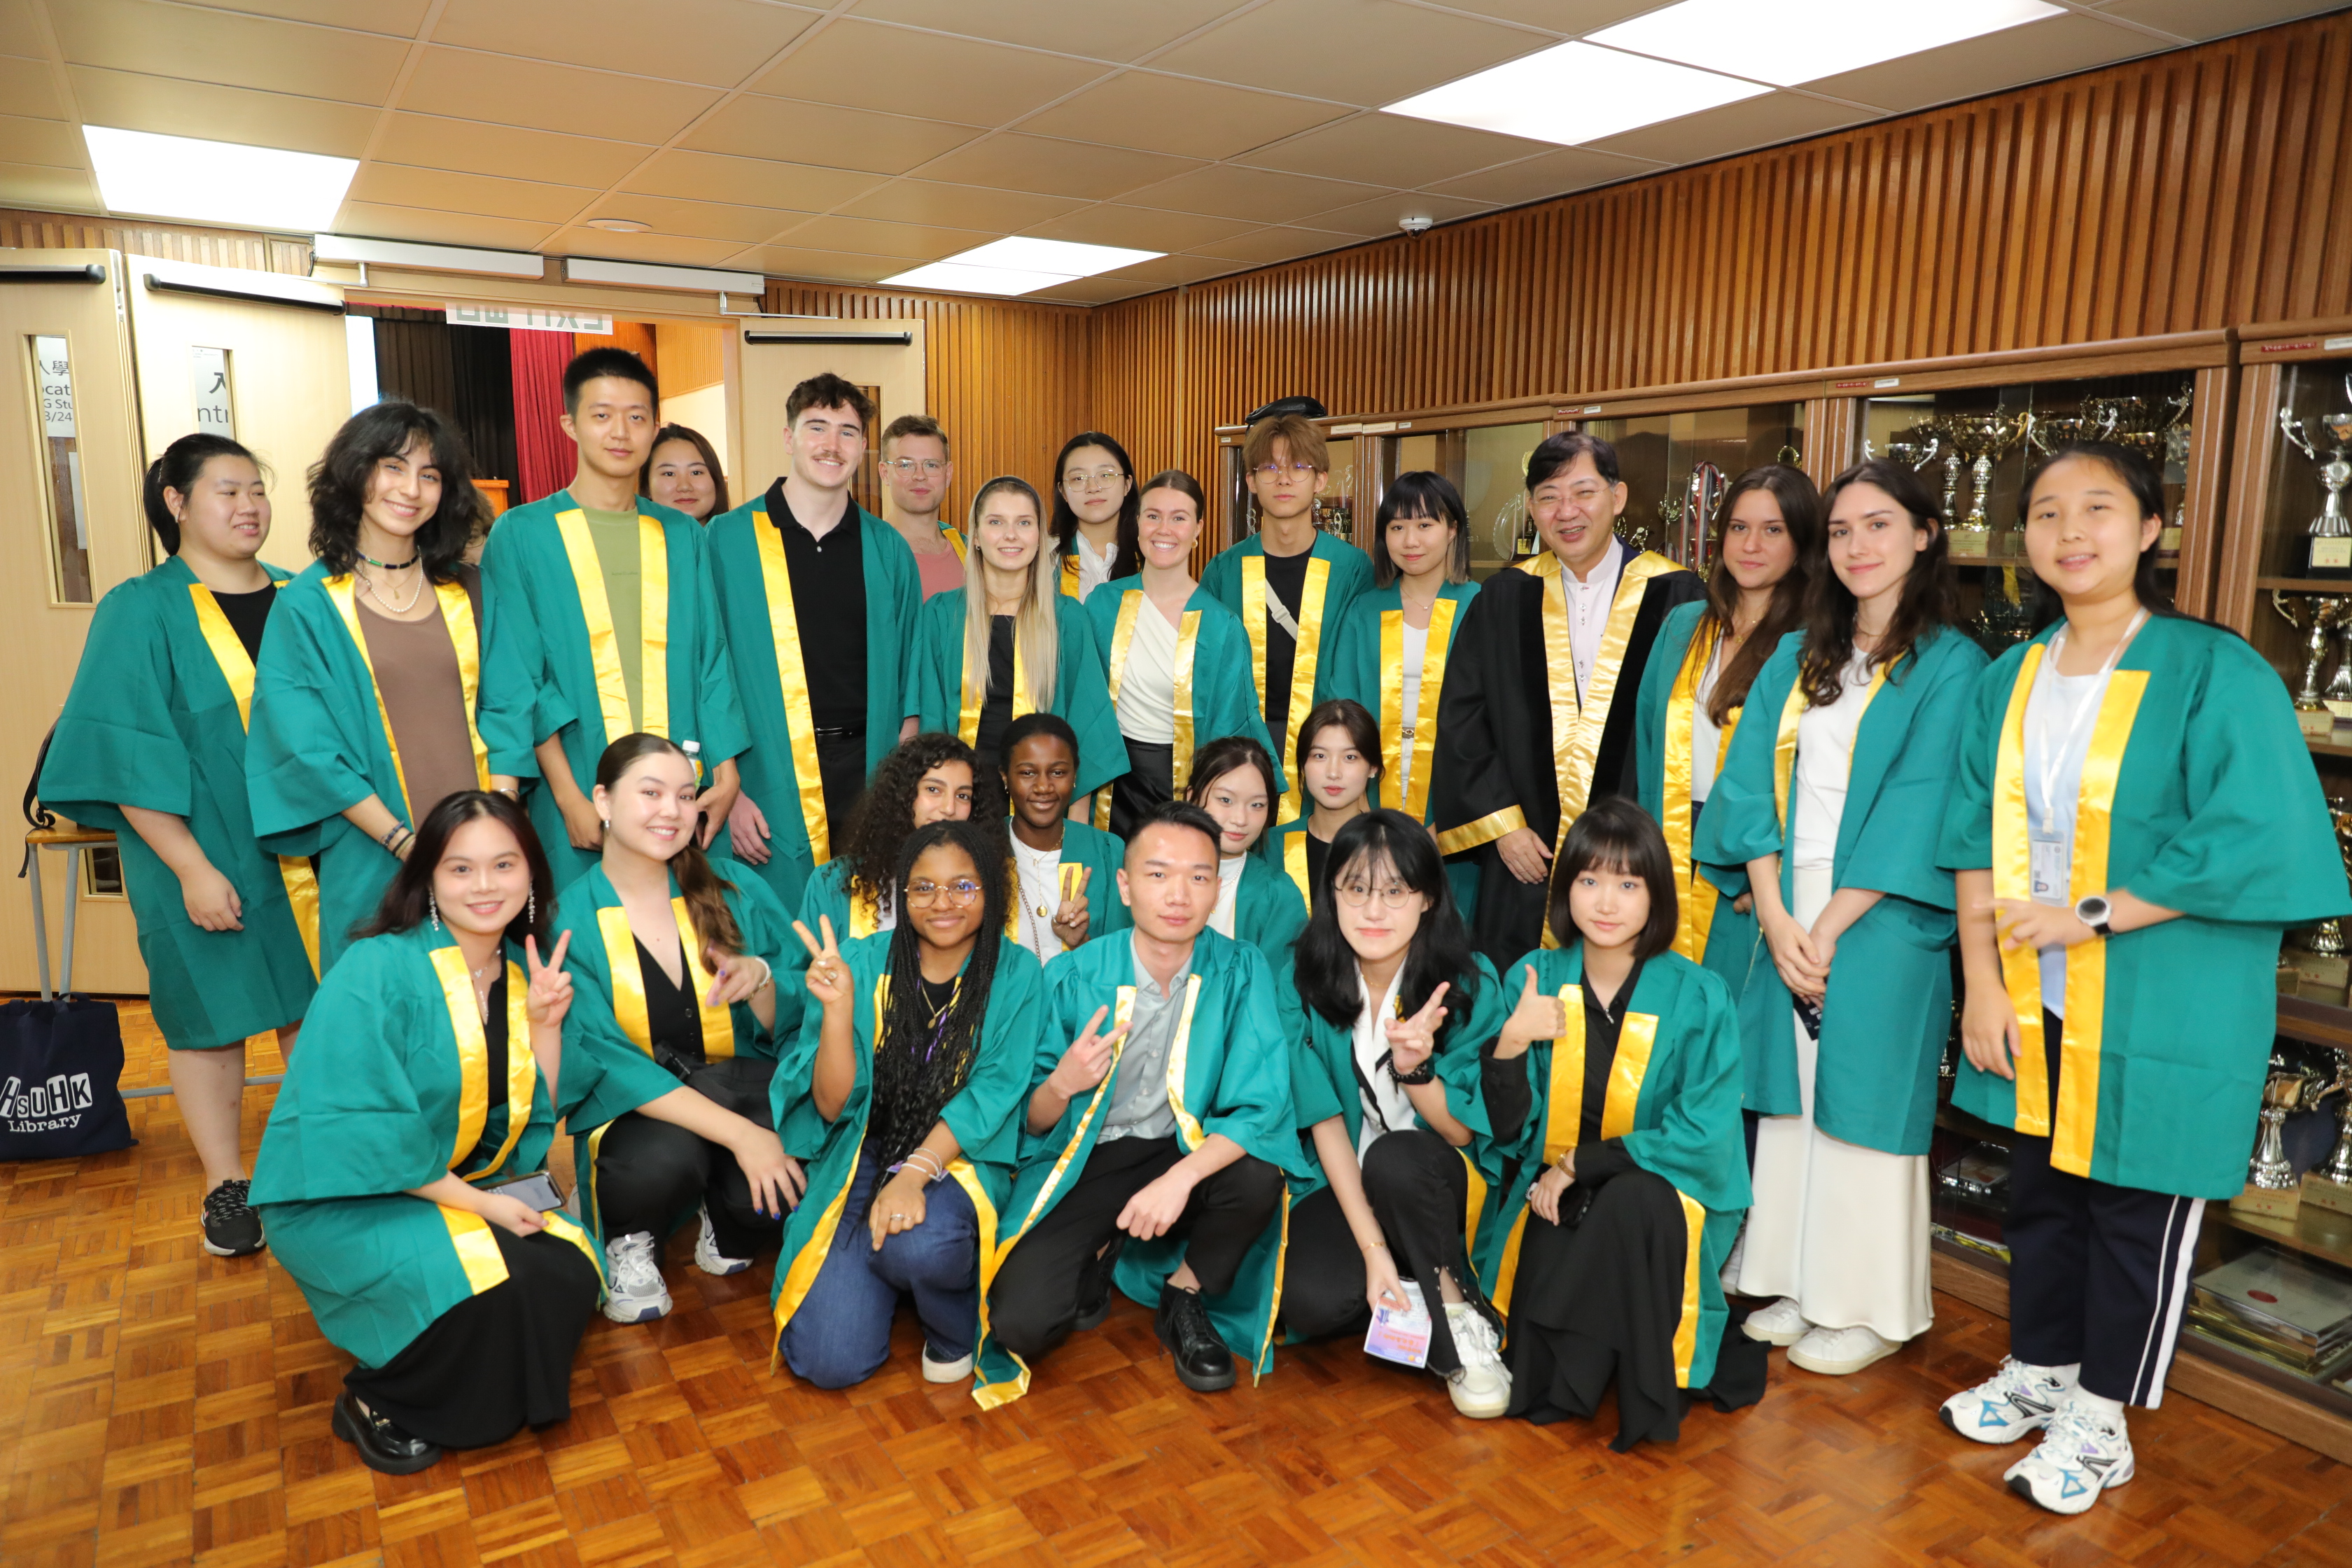 New Students encouraged to enhance humanity qualities at HSUHK’s Convocation